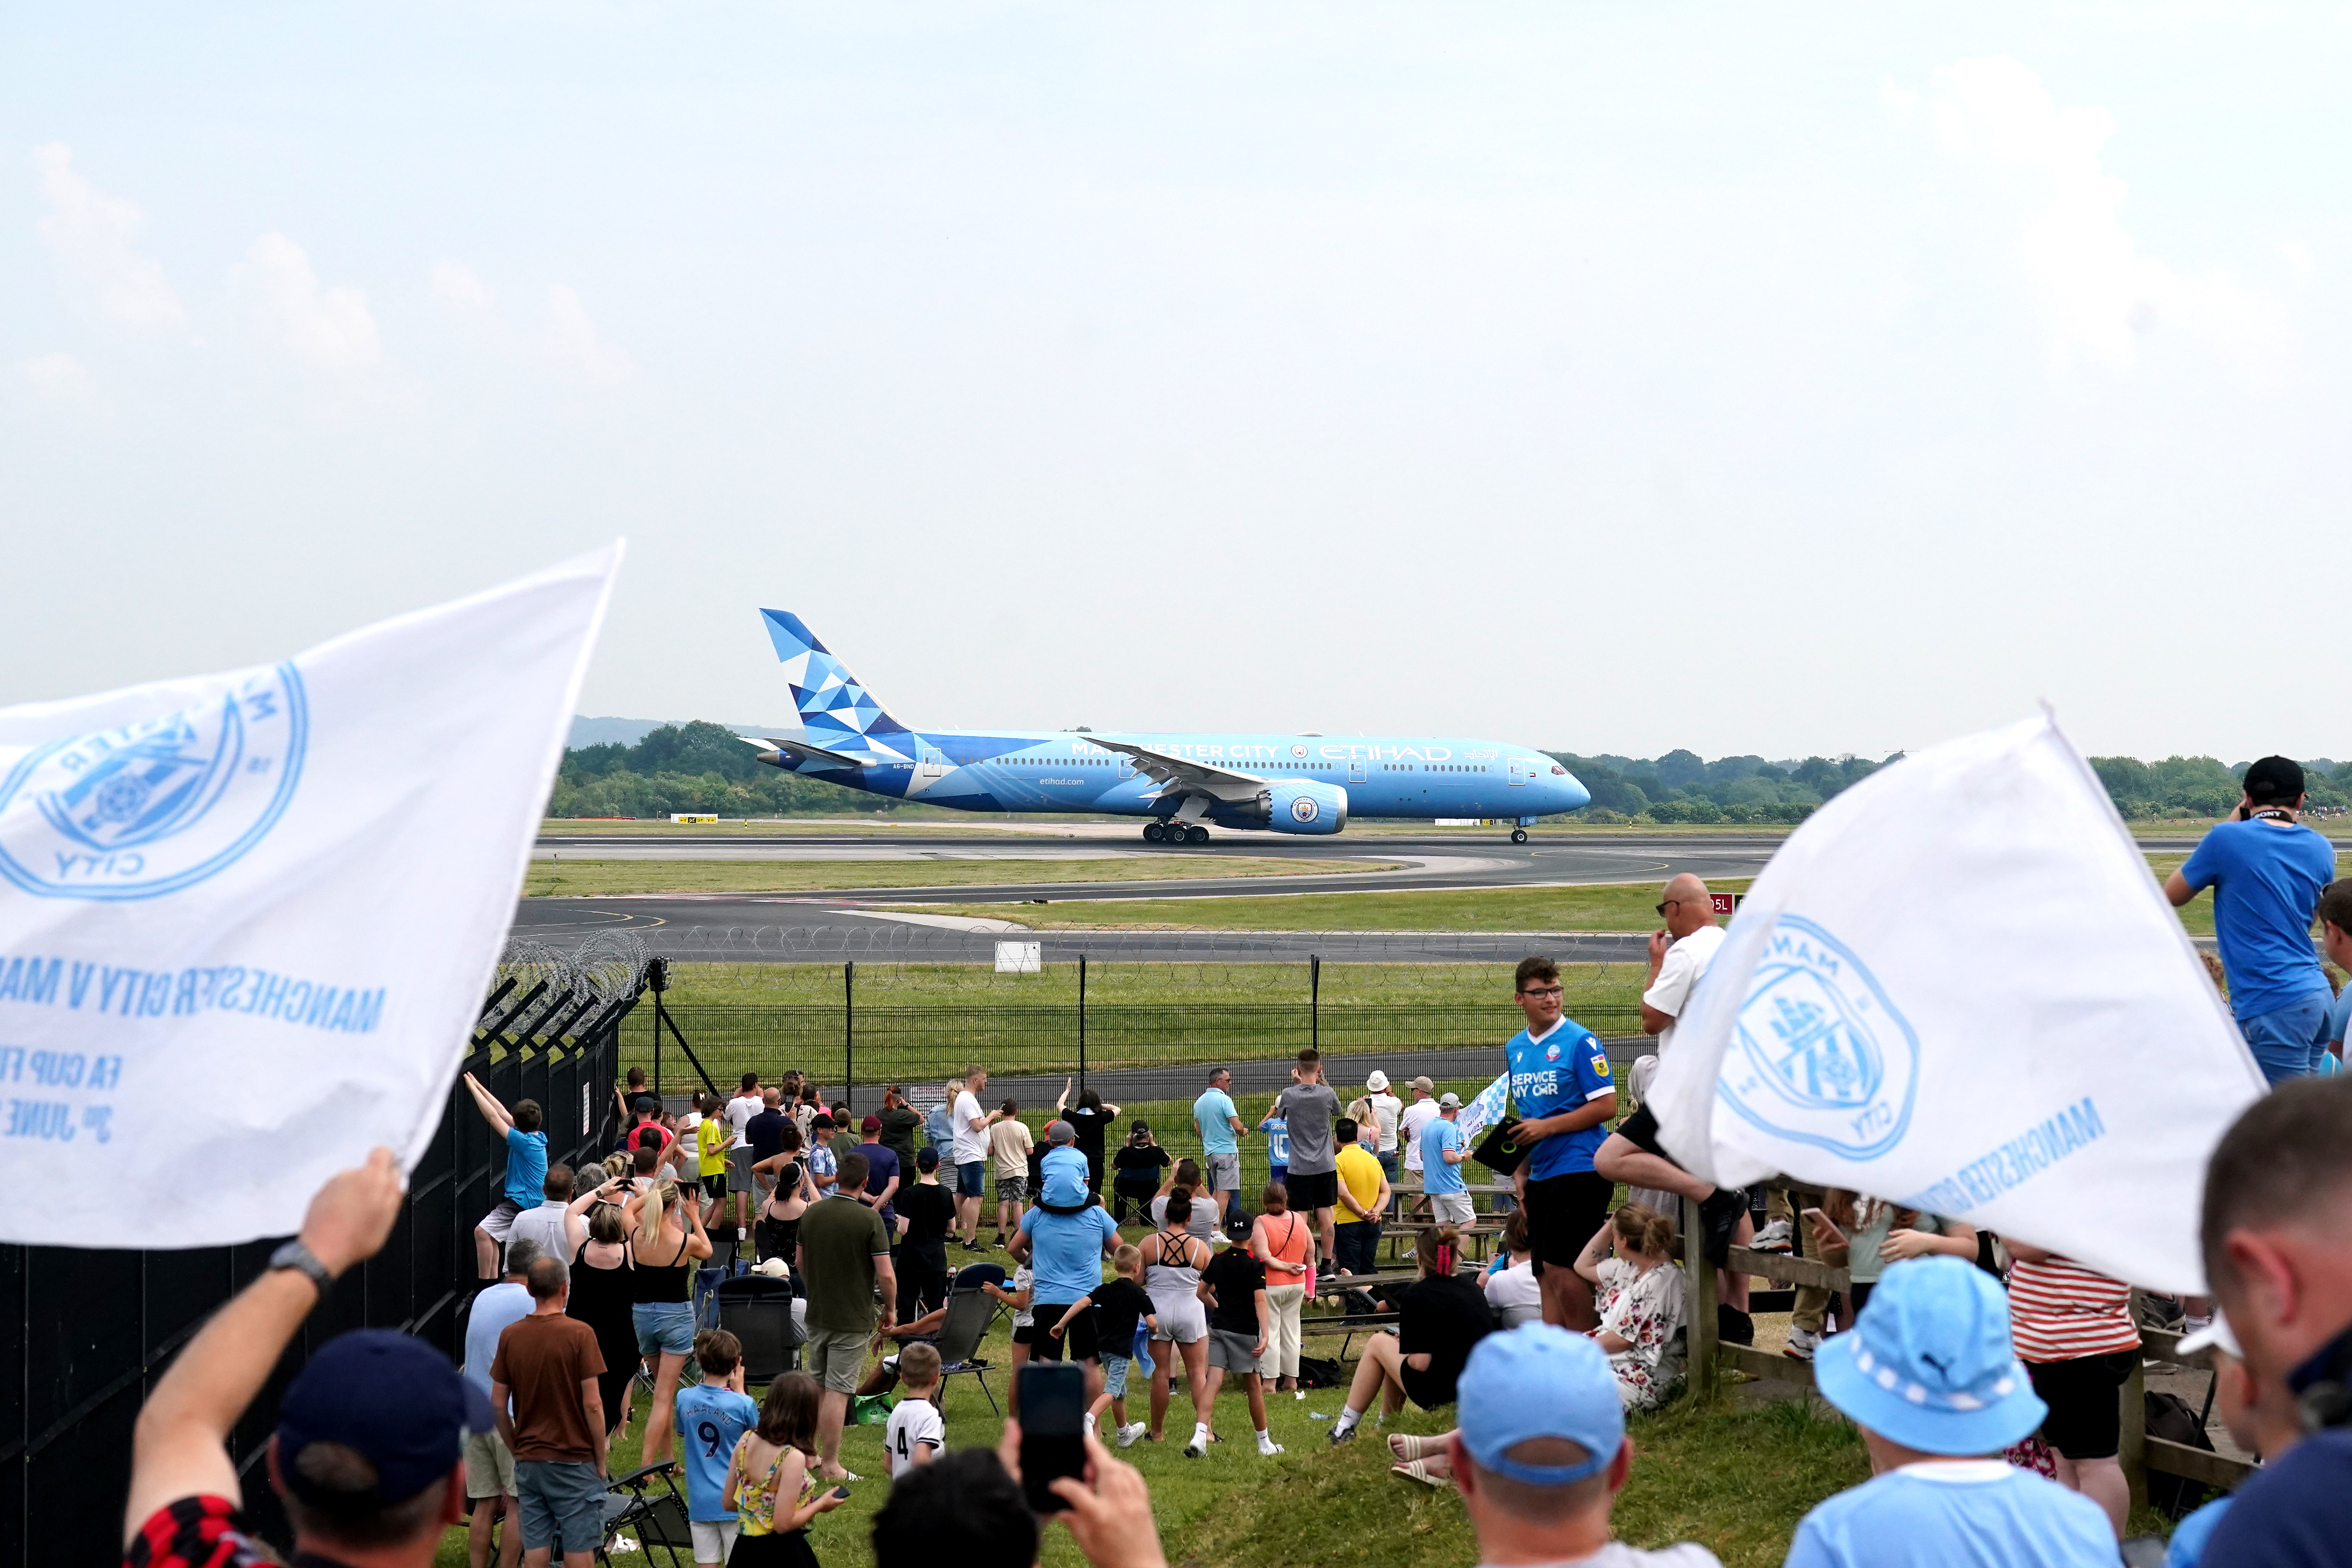 Manchester City fans celebrate as the Boeing 787-9 Dreamliner carrying the Manchester City players lands at Manchester Airport after their victory in the Champions League final 